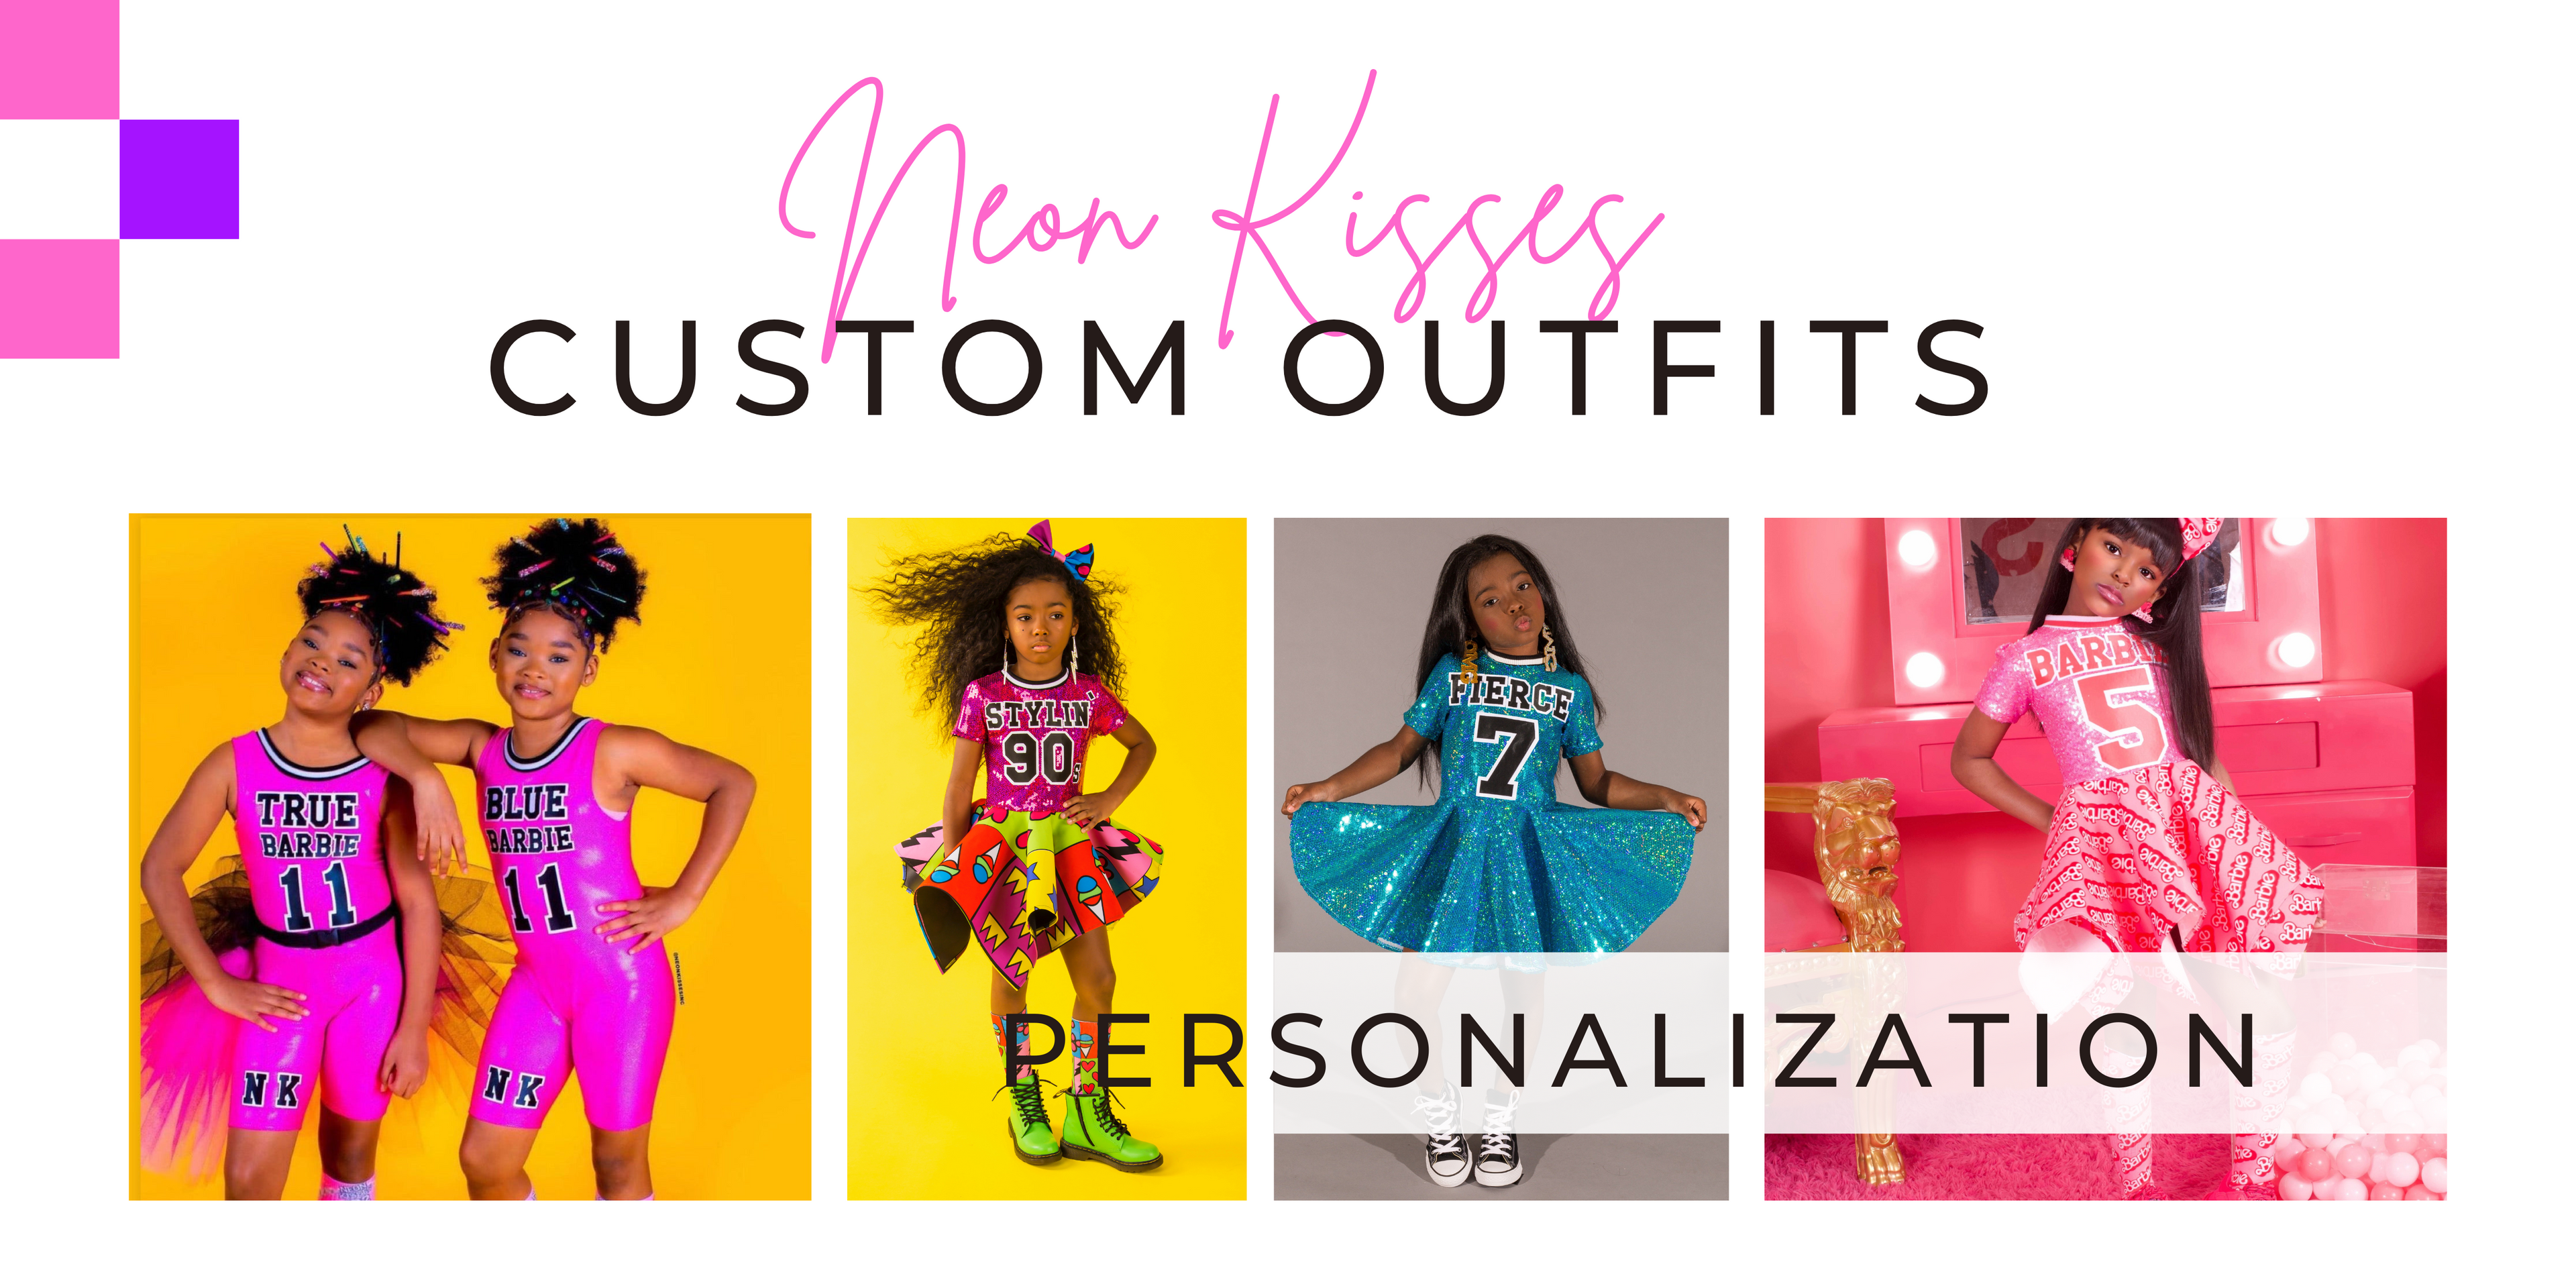 Neon Kisses Custom Outfits